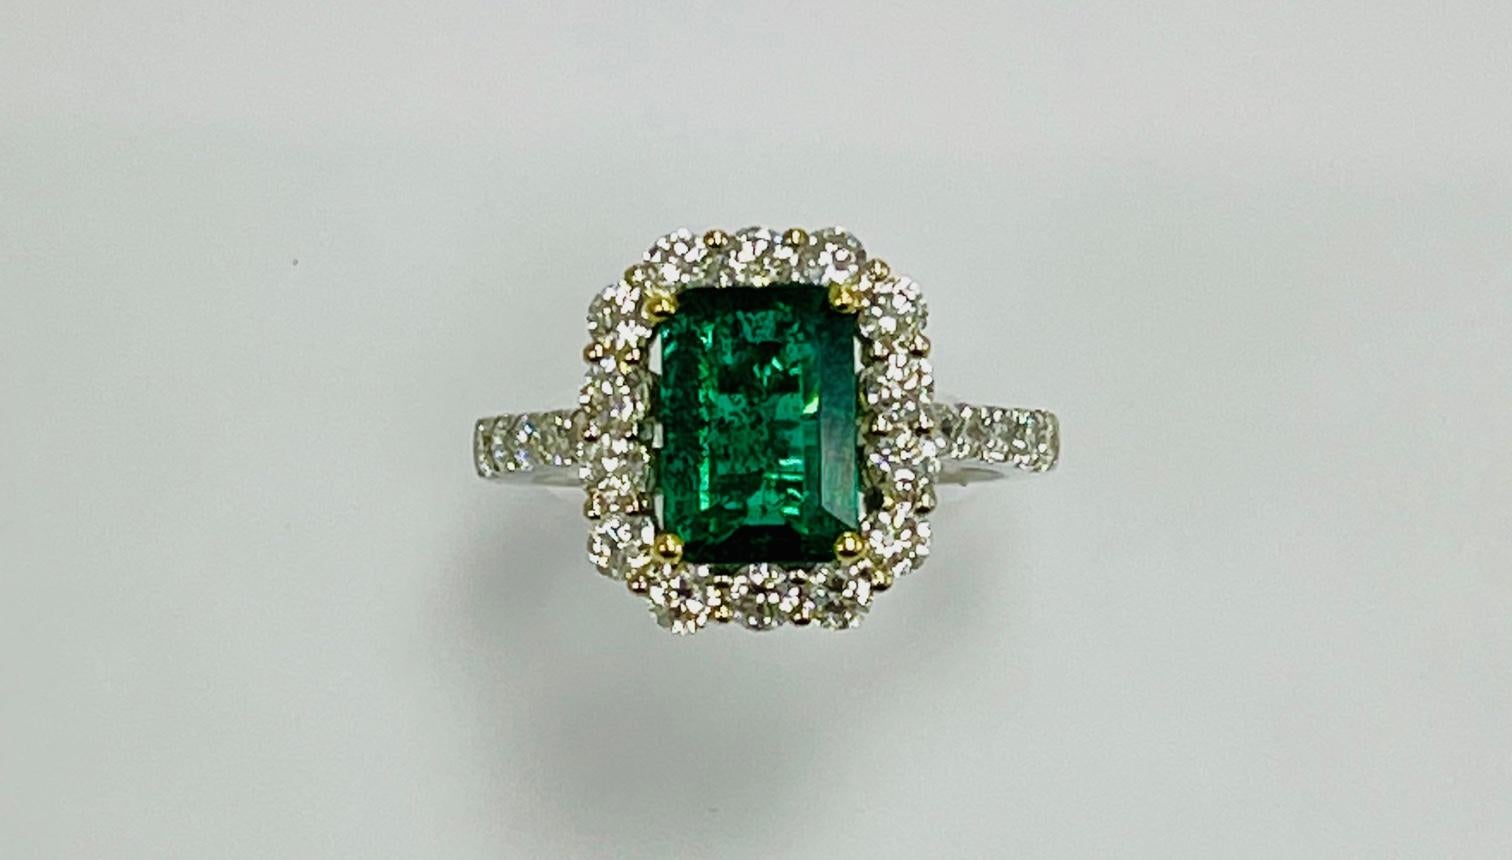 1.92 Carat Zambian emerald cut emerald set in 18k white gold ring 1.07 Carat diamonds around it and hlaf way on the shank .